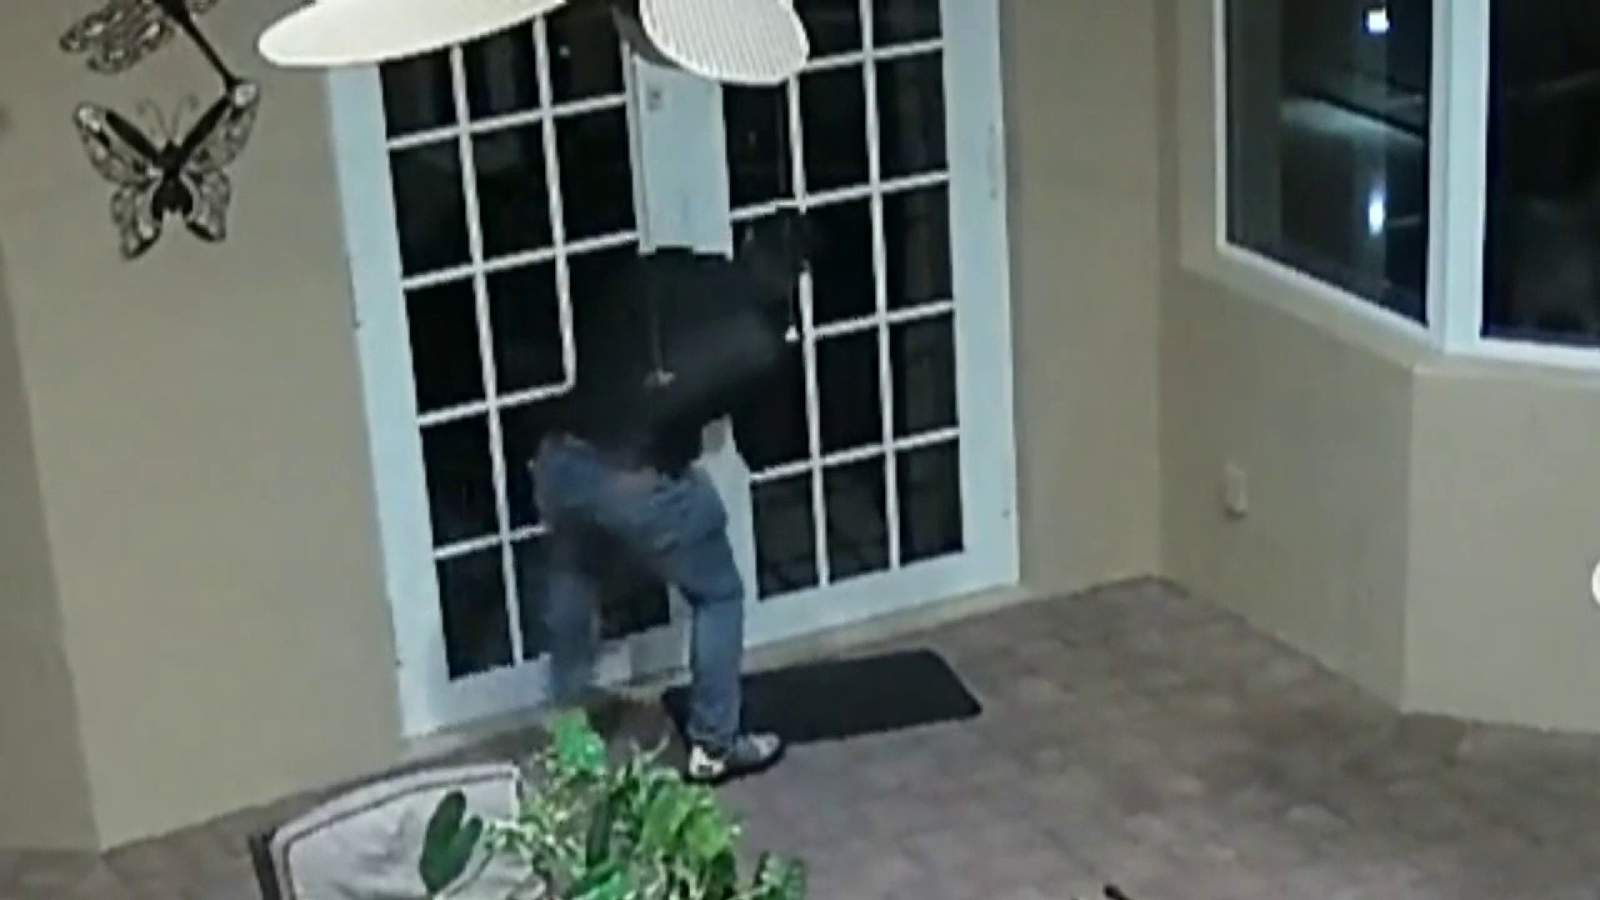 Video shows man repeatedly hurling rock at impact windows in robbery attempt